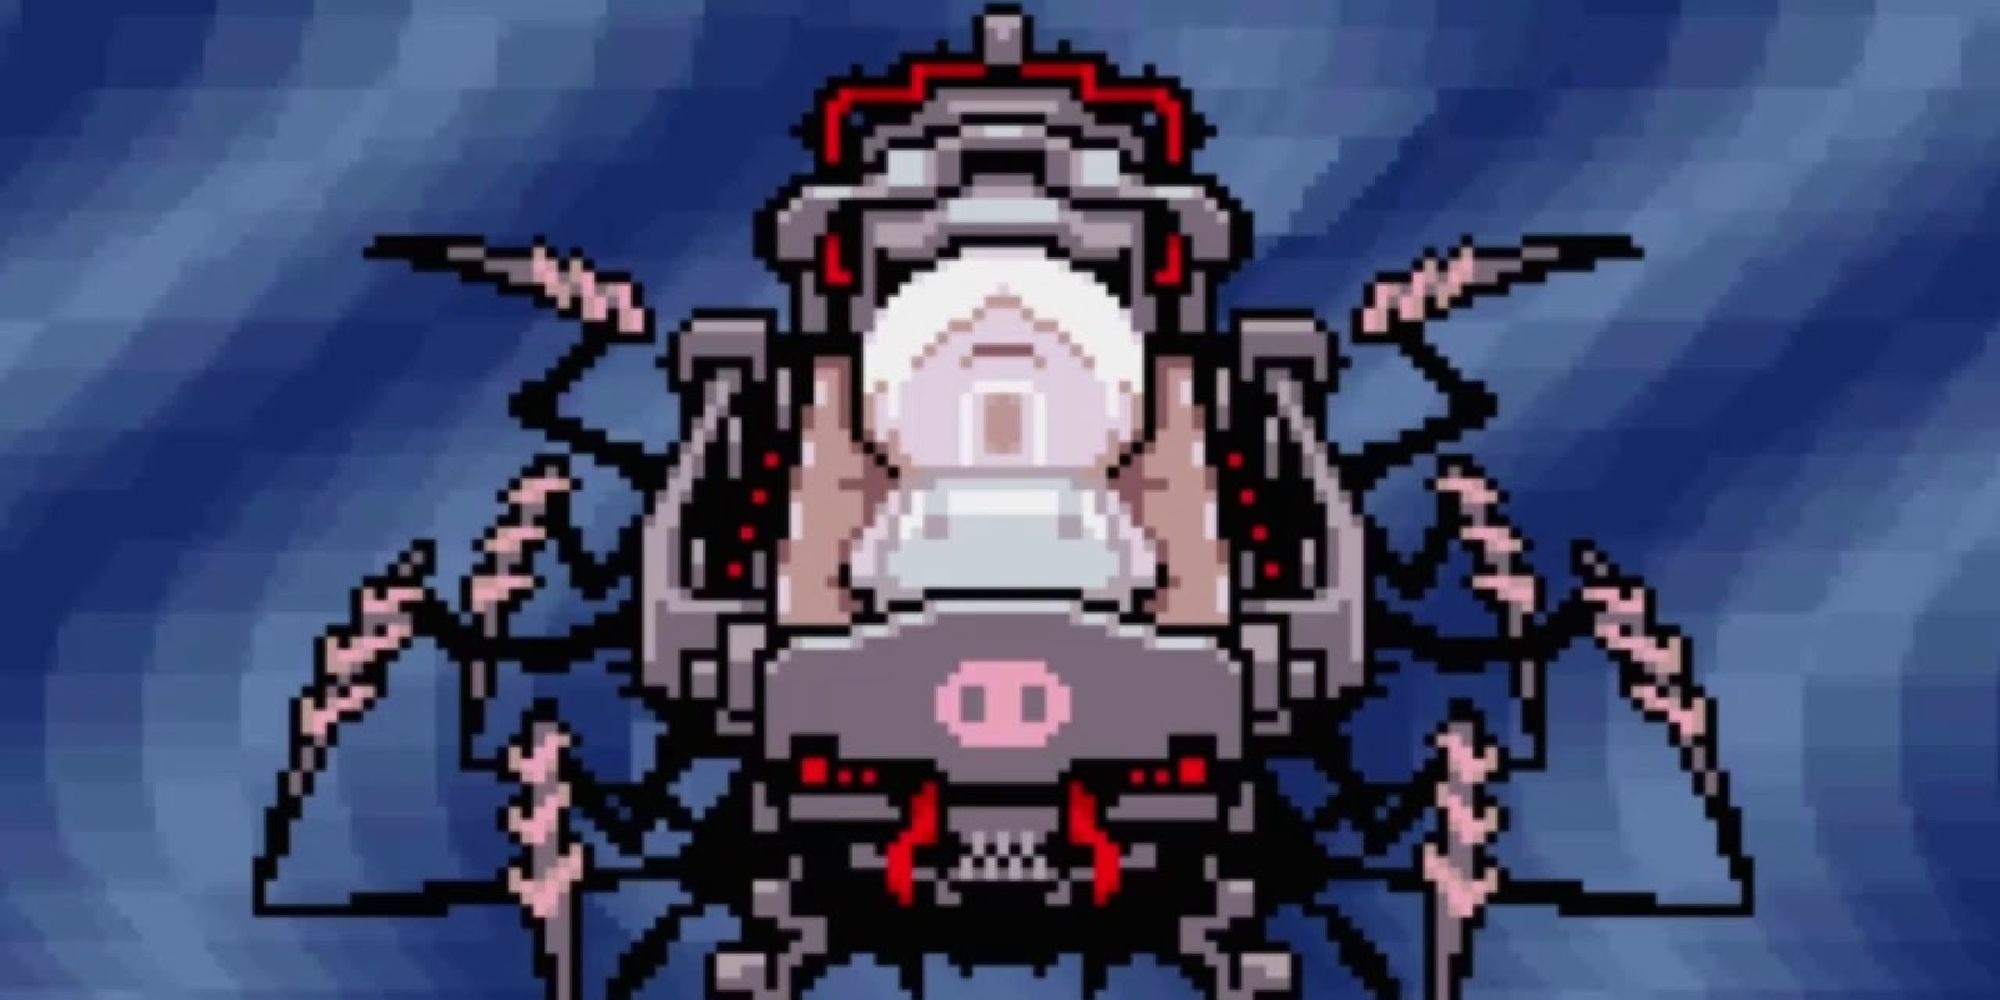 Porky in battle in the Absolutely Safe Capsule in Mother 3